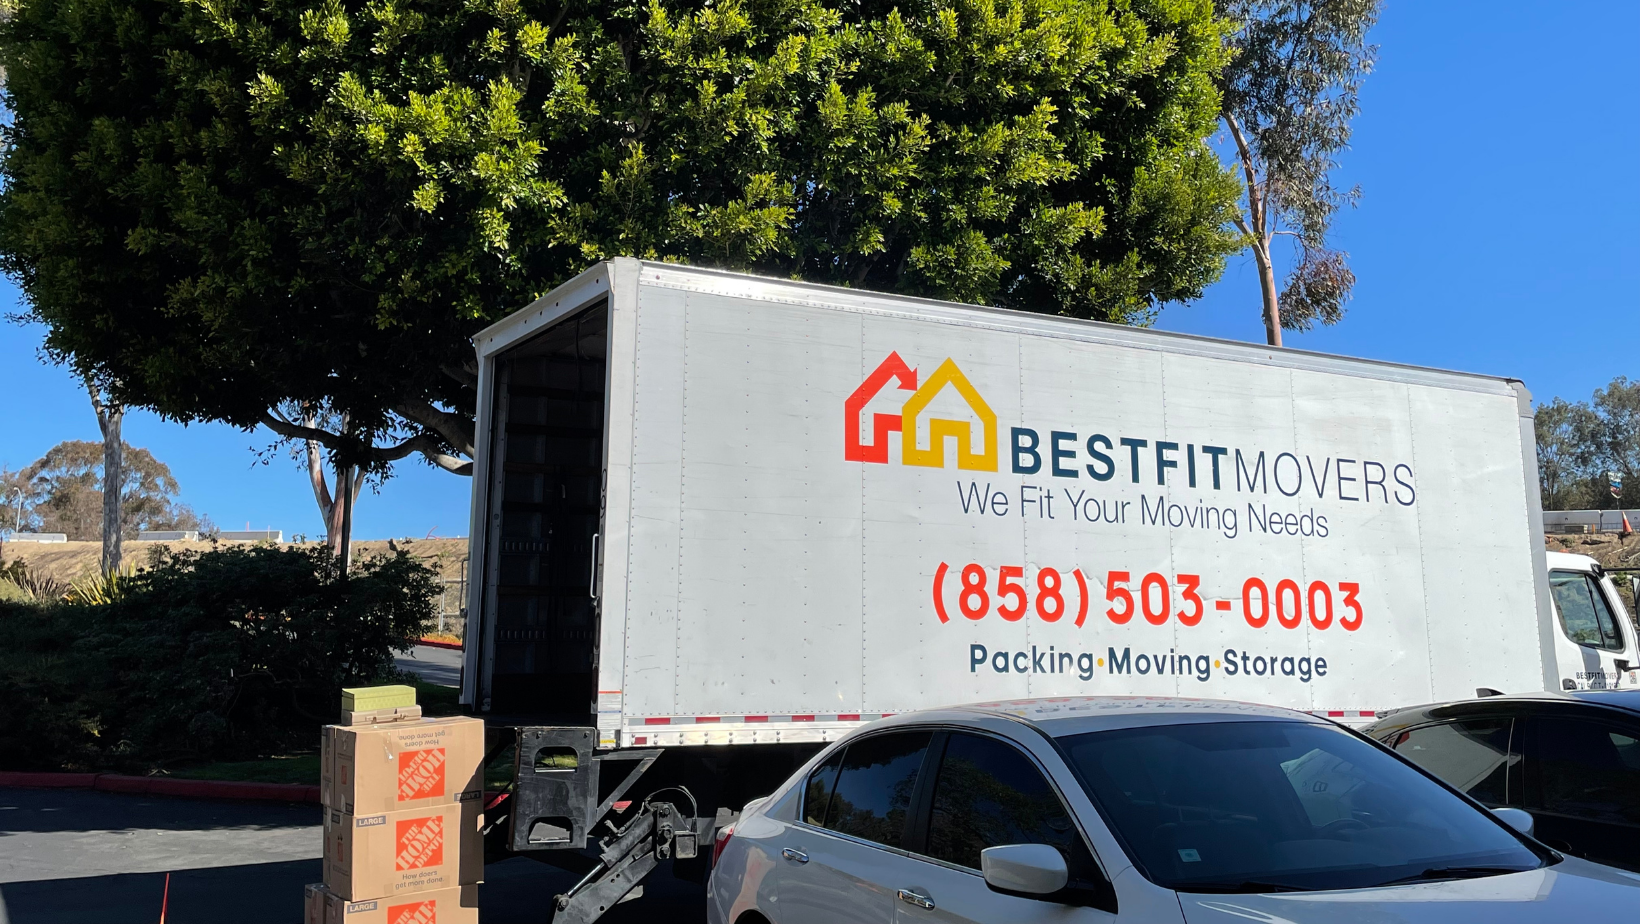 San Diego Apartment Best Fit Movers